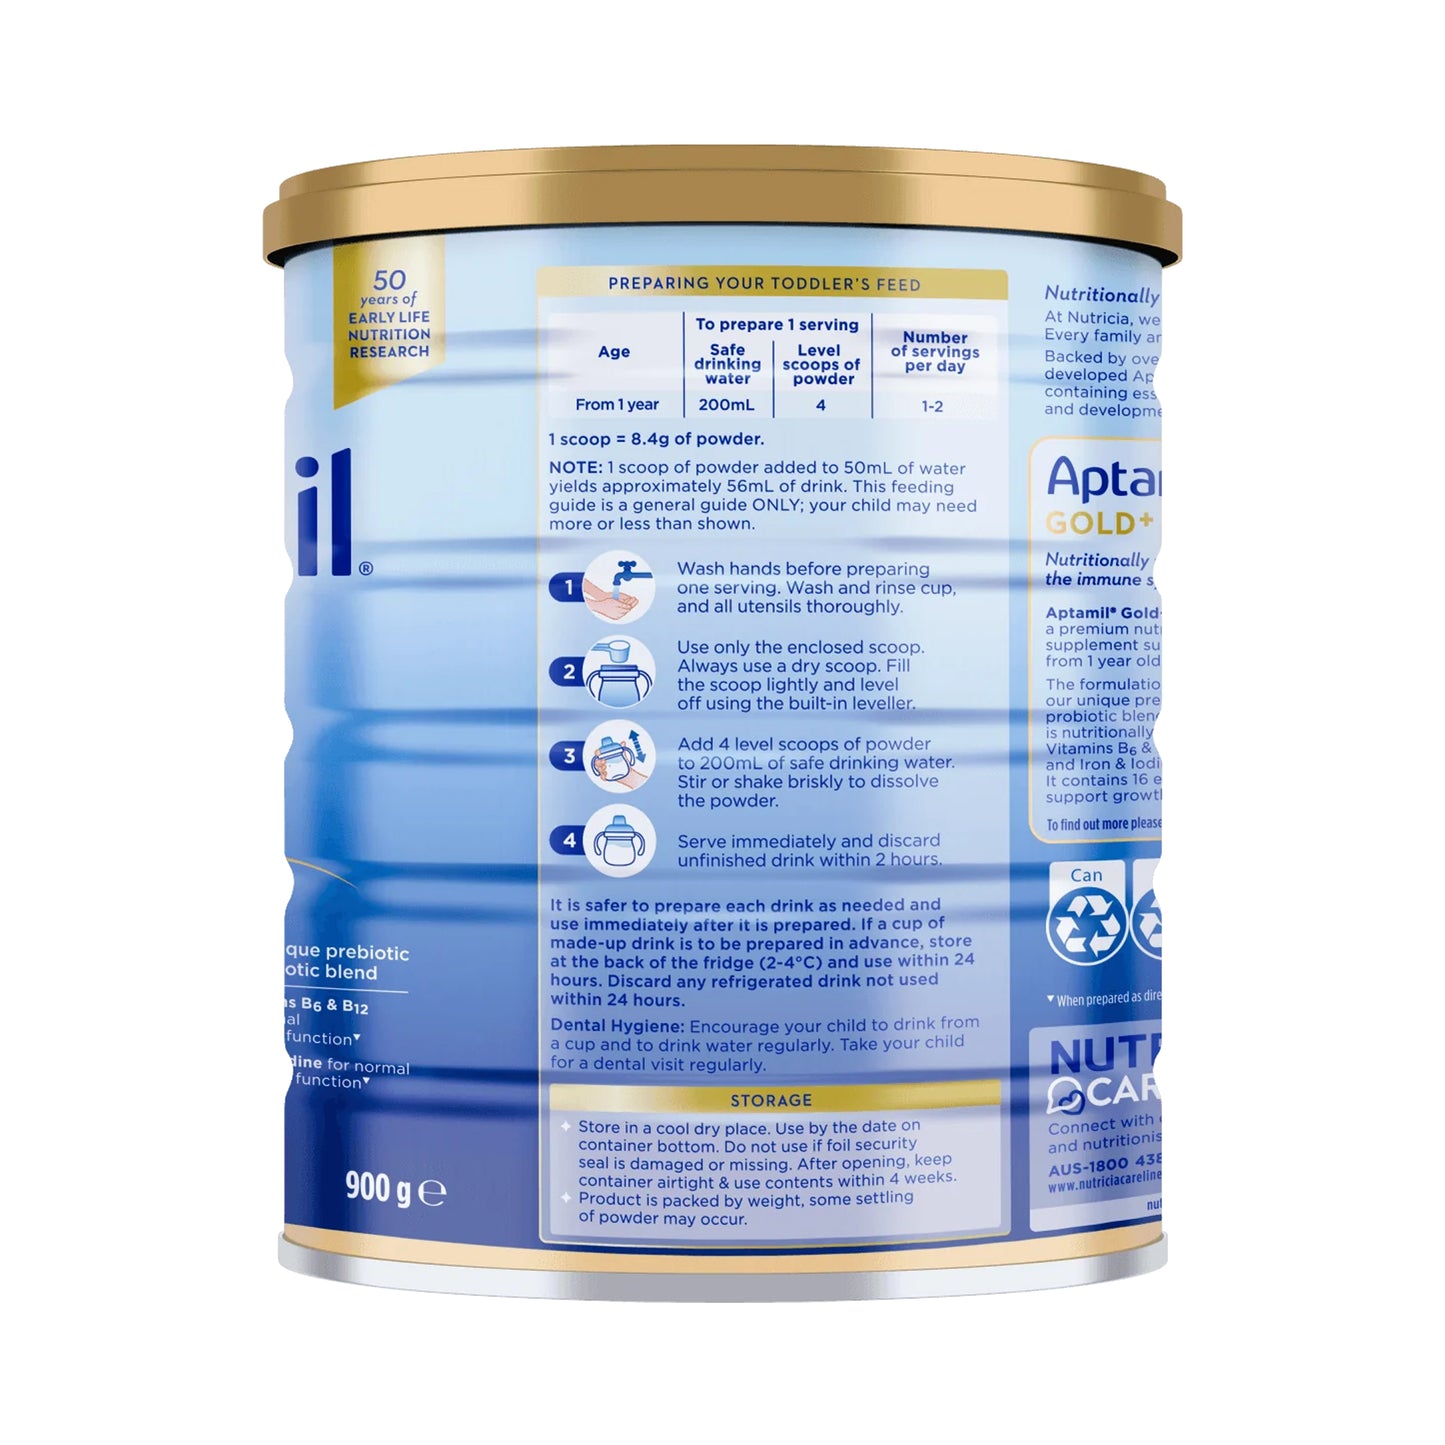 Nutricia Aptamil Gold+ 3 - Premium Toddler Nutritional Supplement From 1 Year 900g